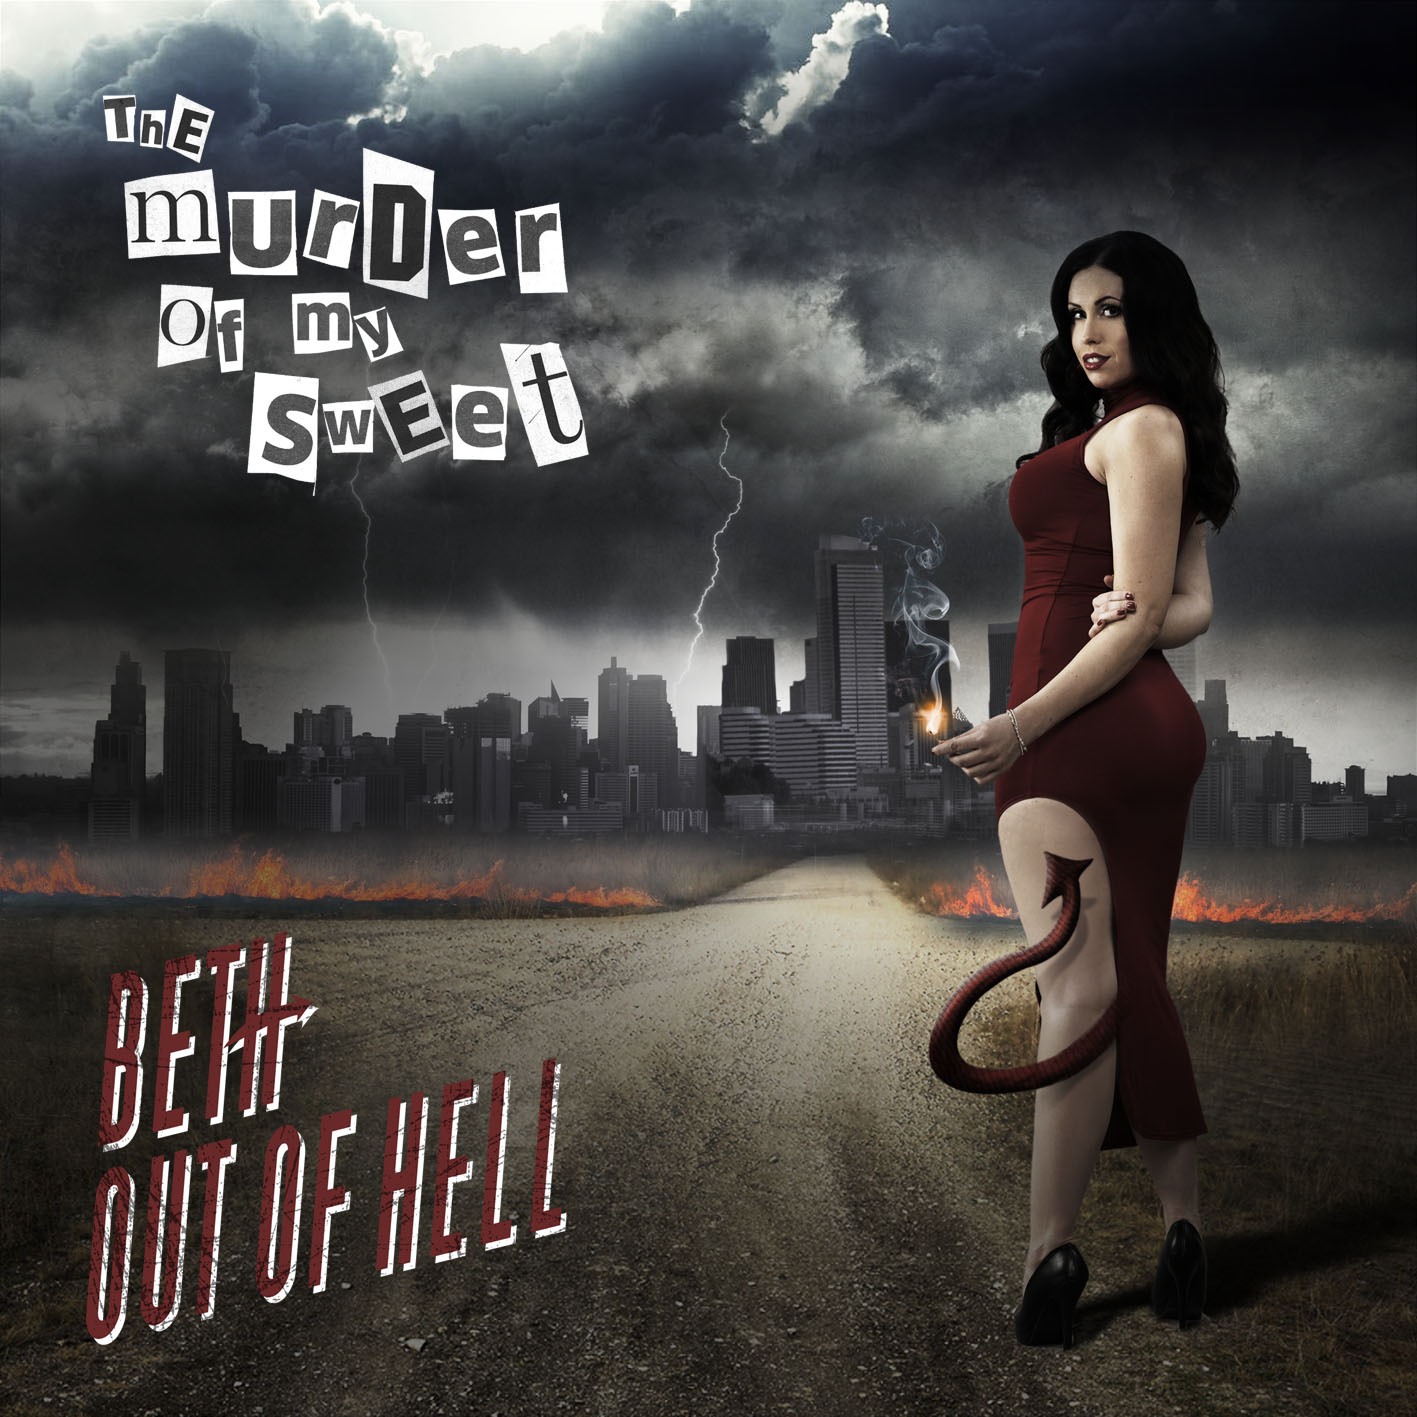 THE MURDER OF MY SWEET - Beth Out of Hell